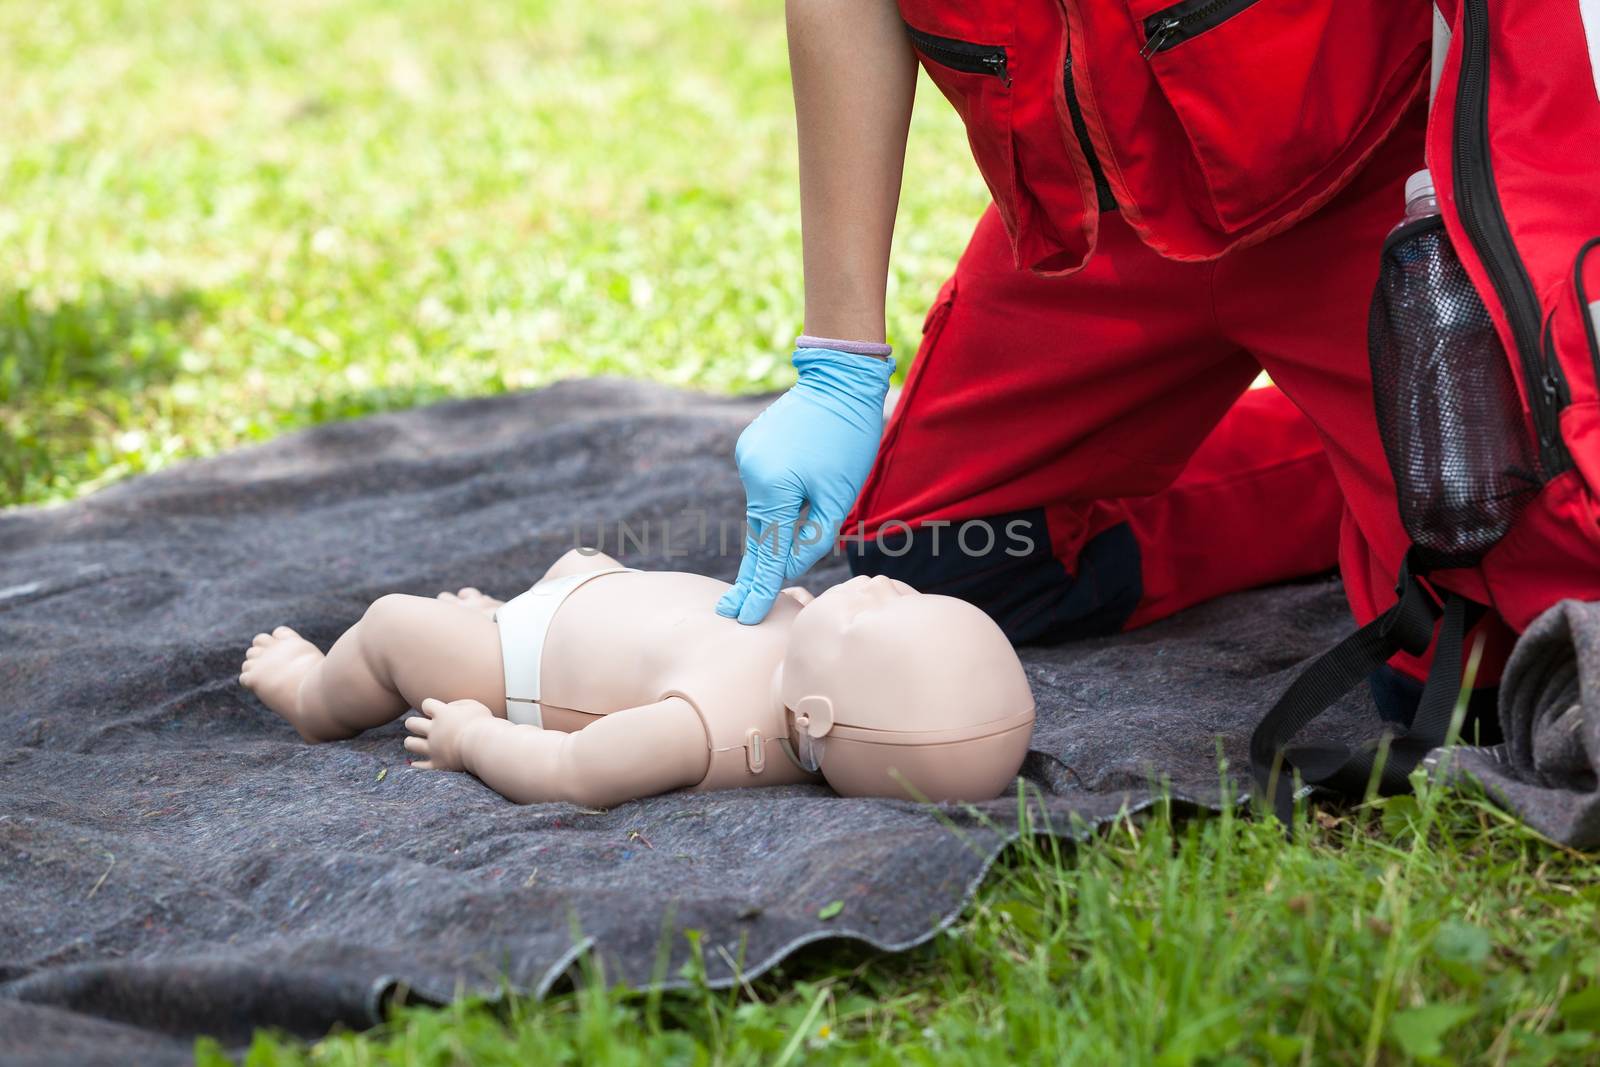 Infant CPR dummy first aid by wellphoto